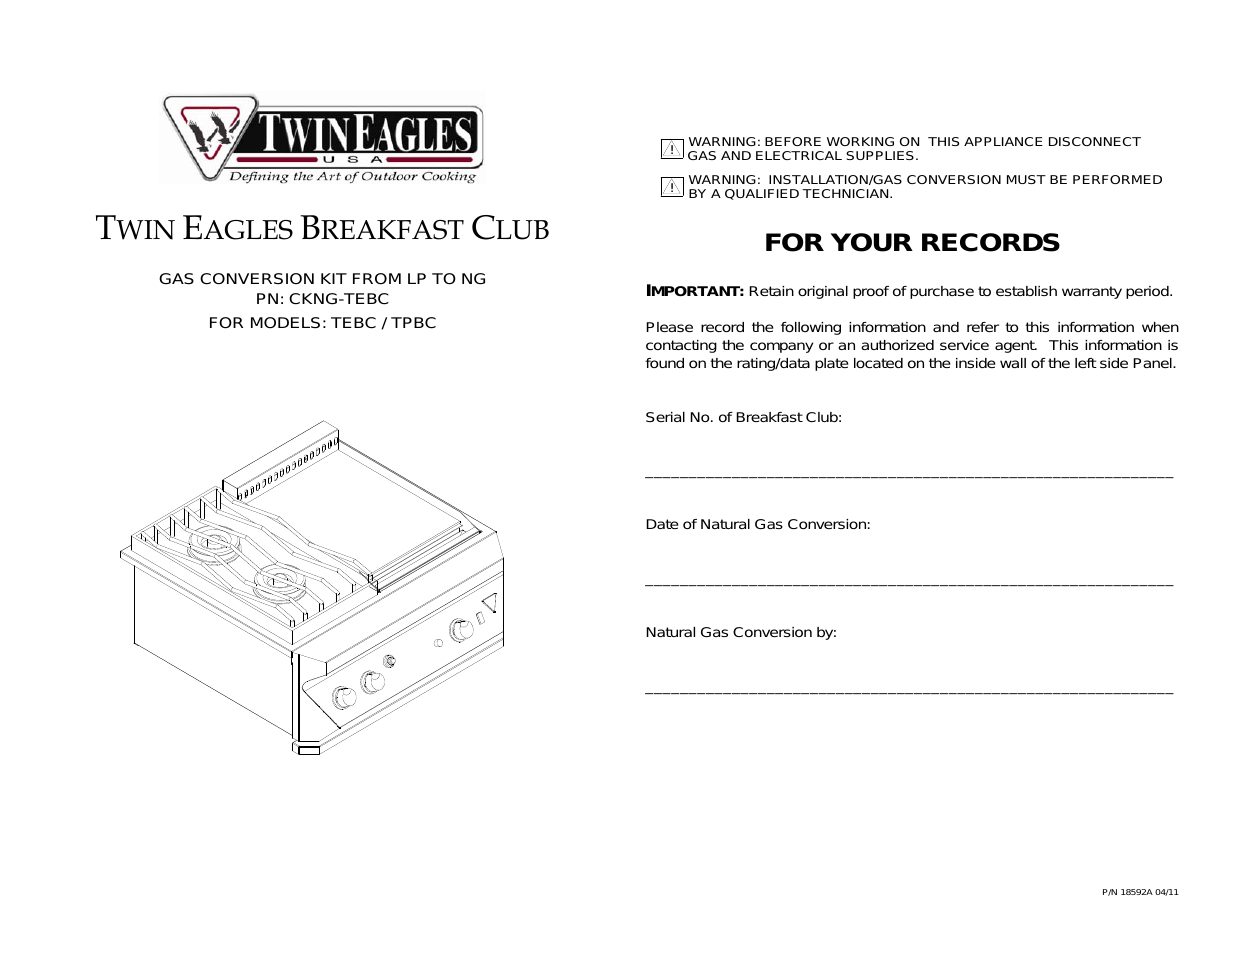 Dine and Breakfast Club LP to NG Conversion